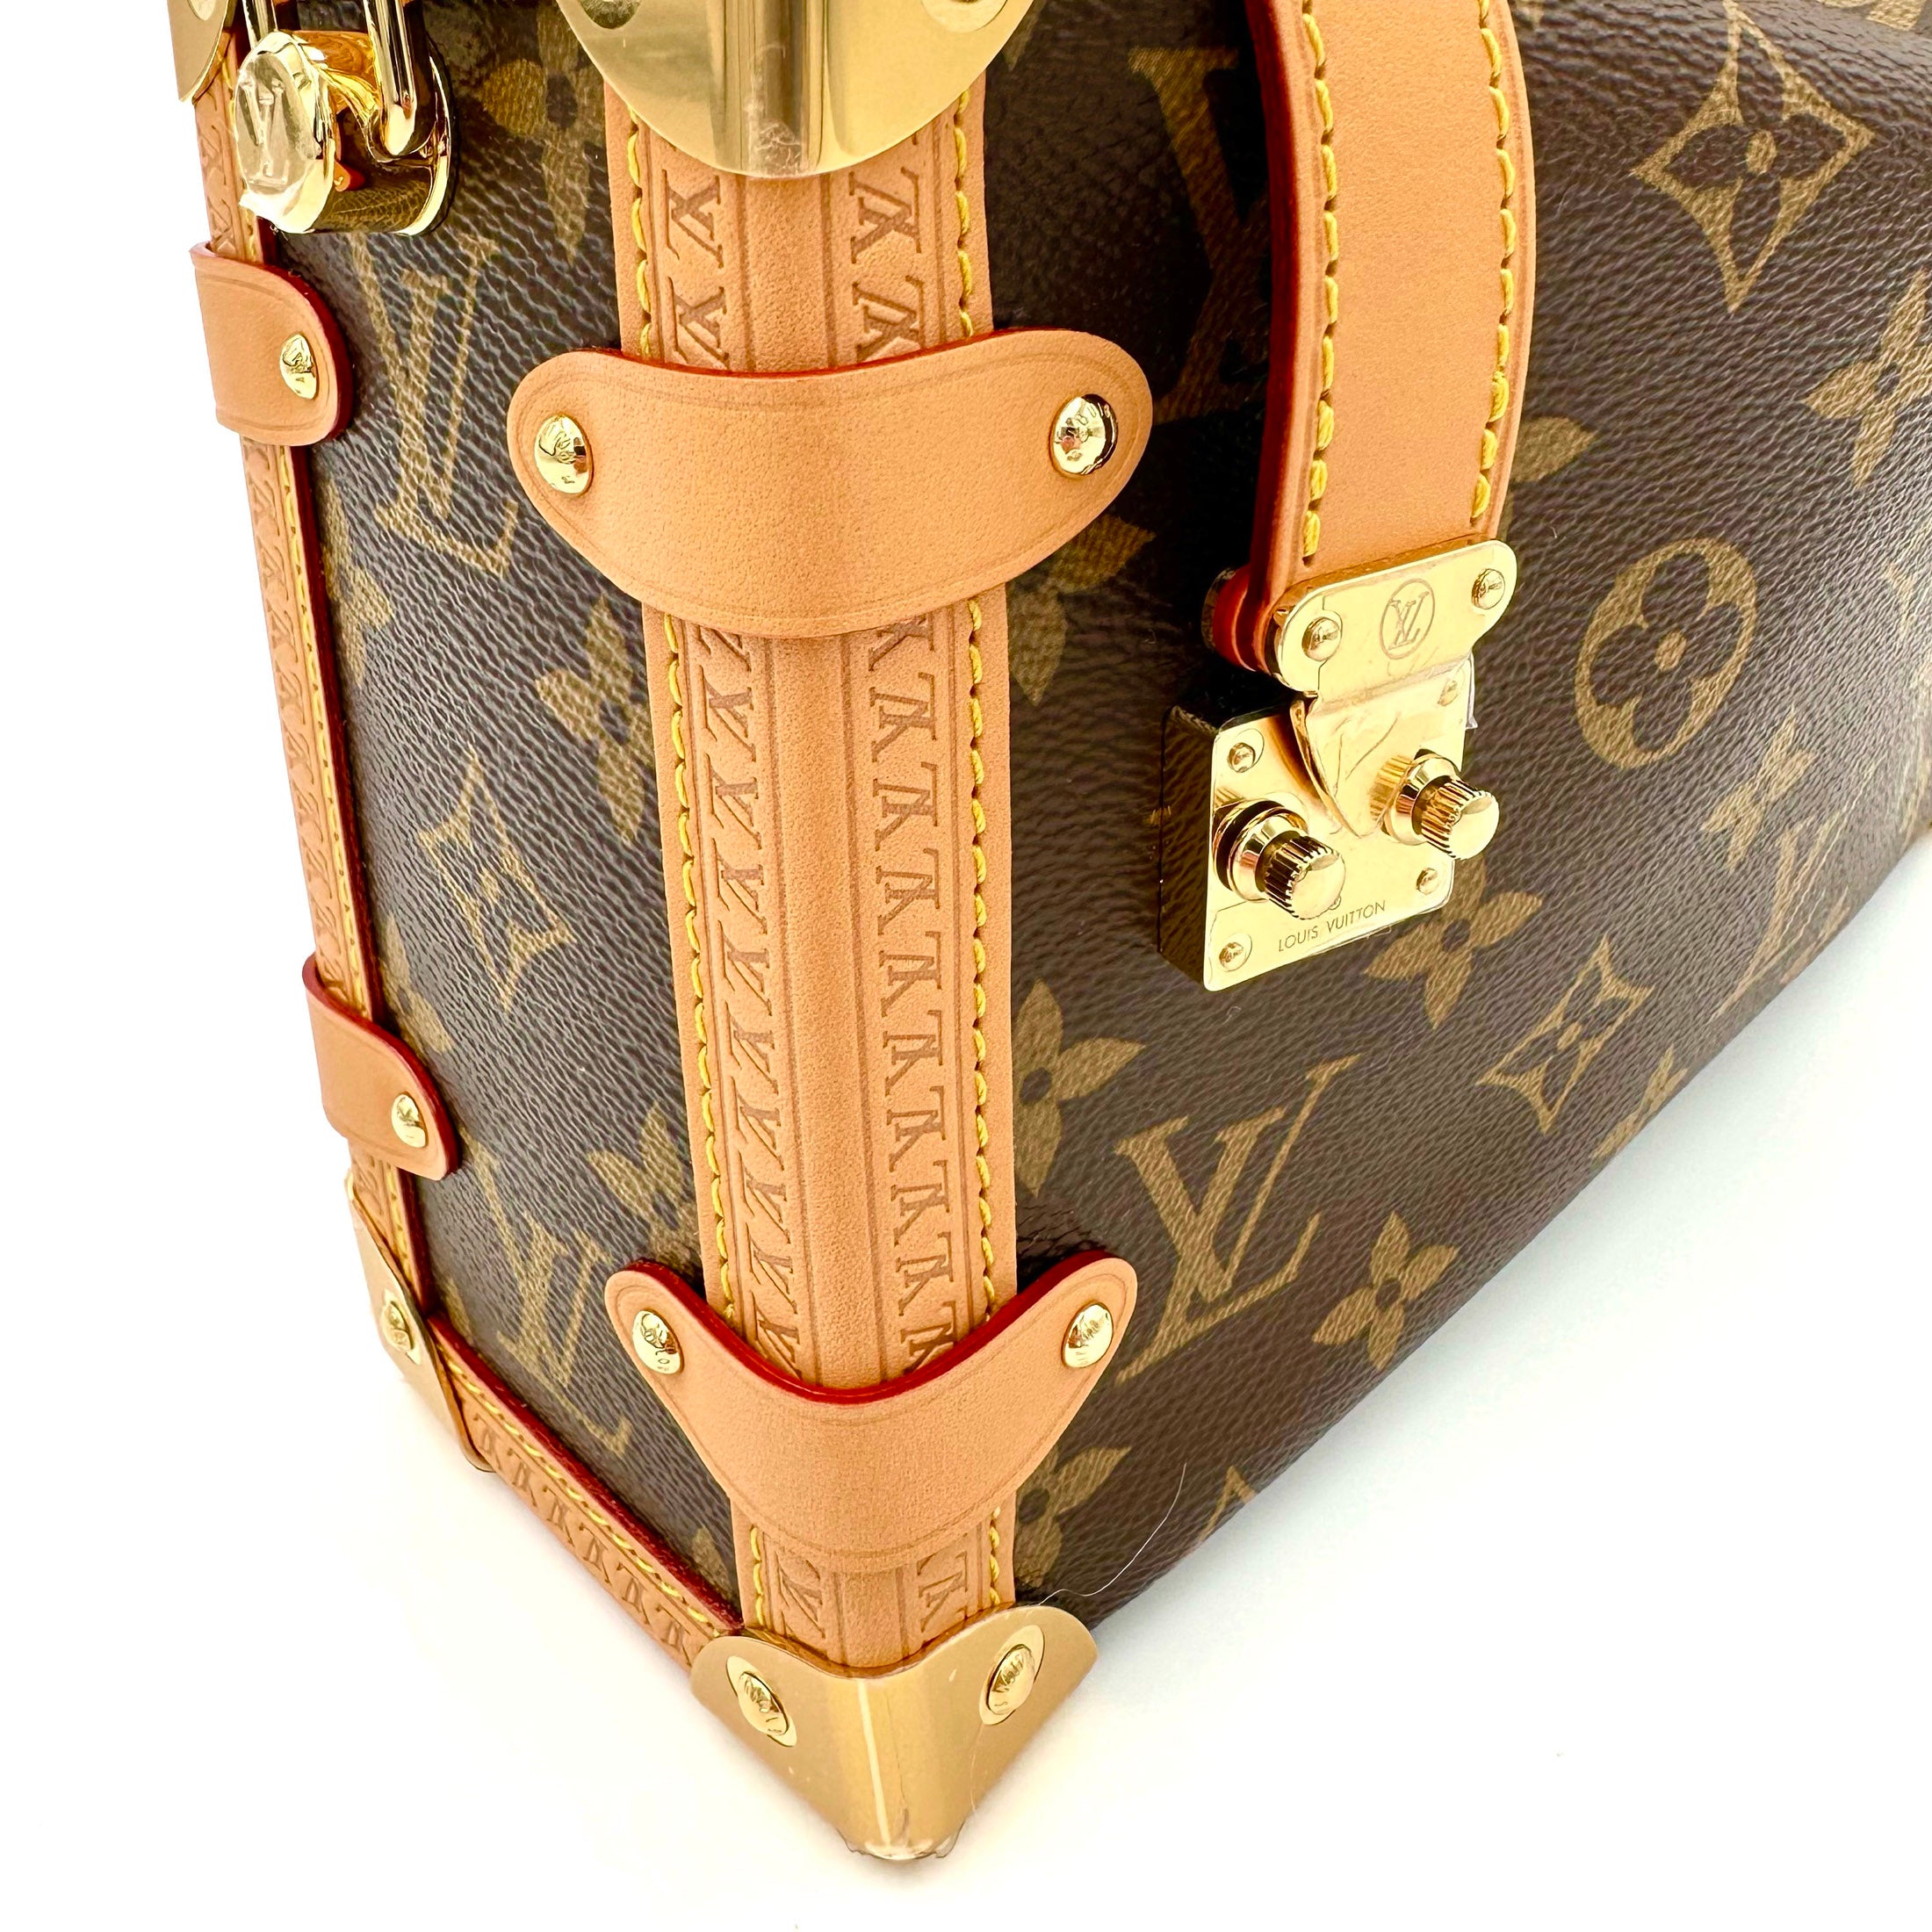 LV Side Trunk PM - Kaialux